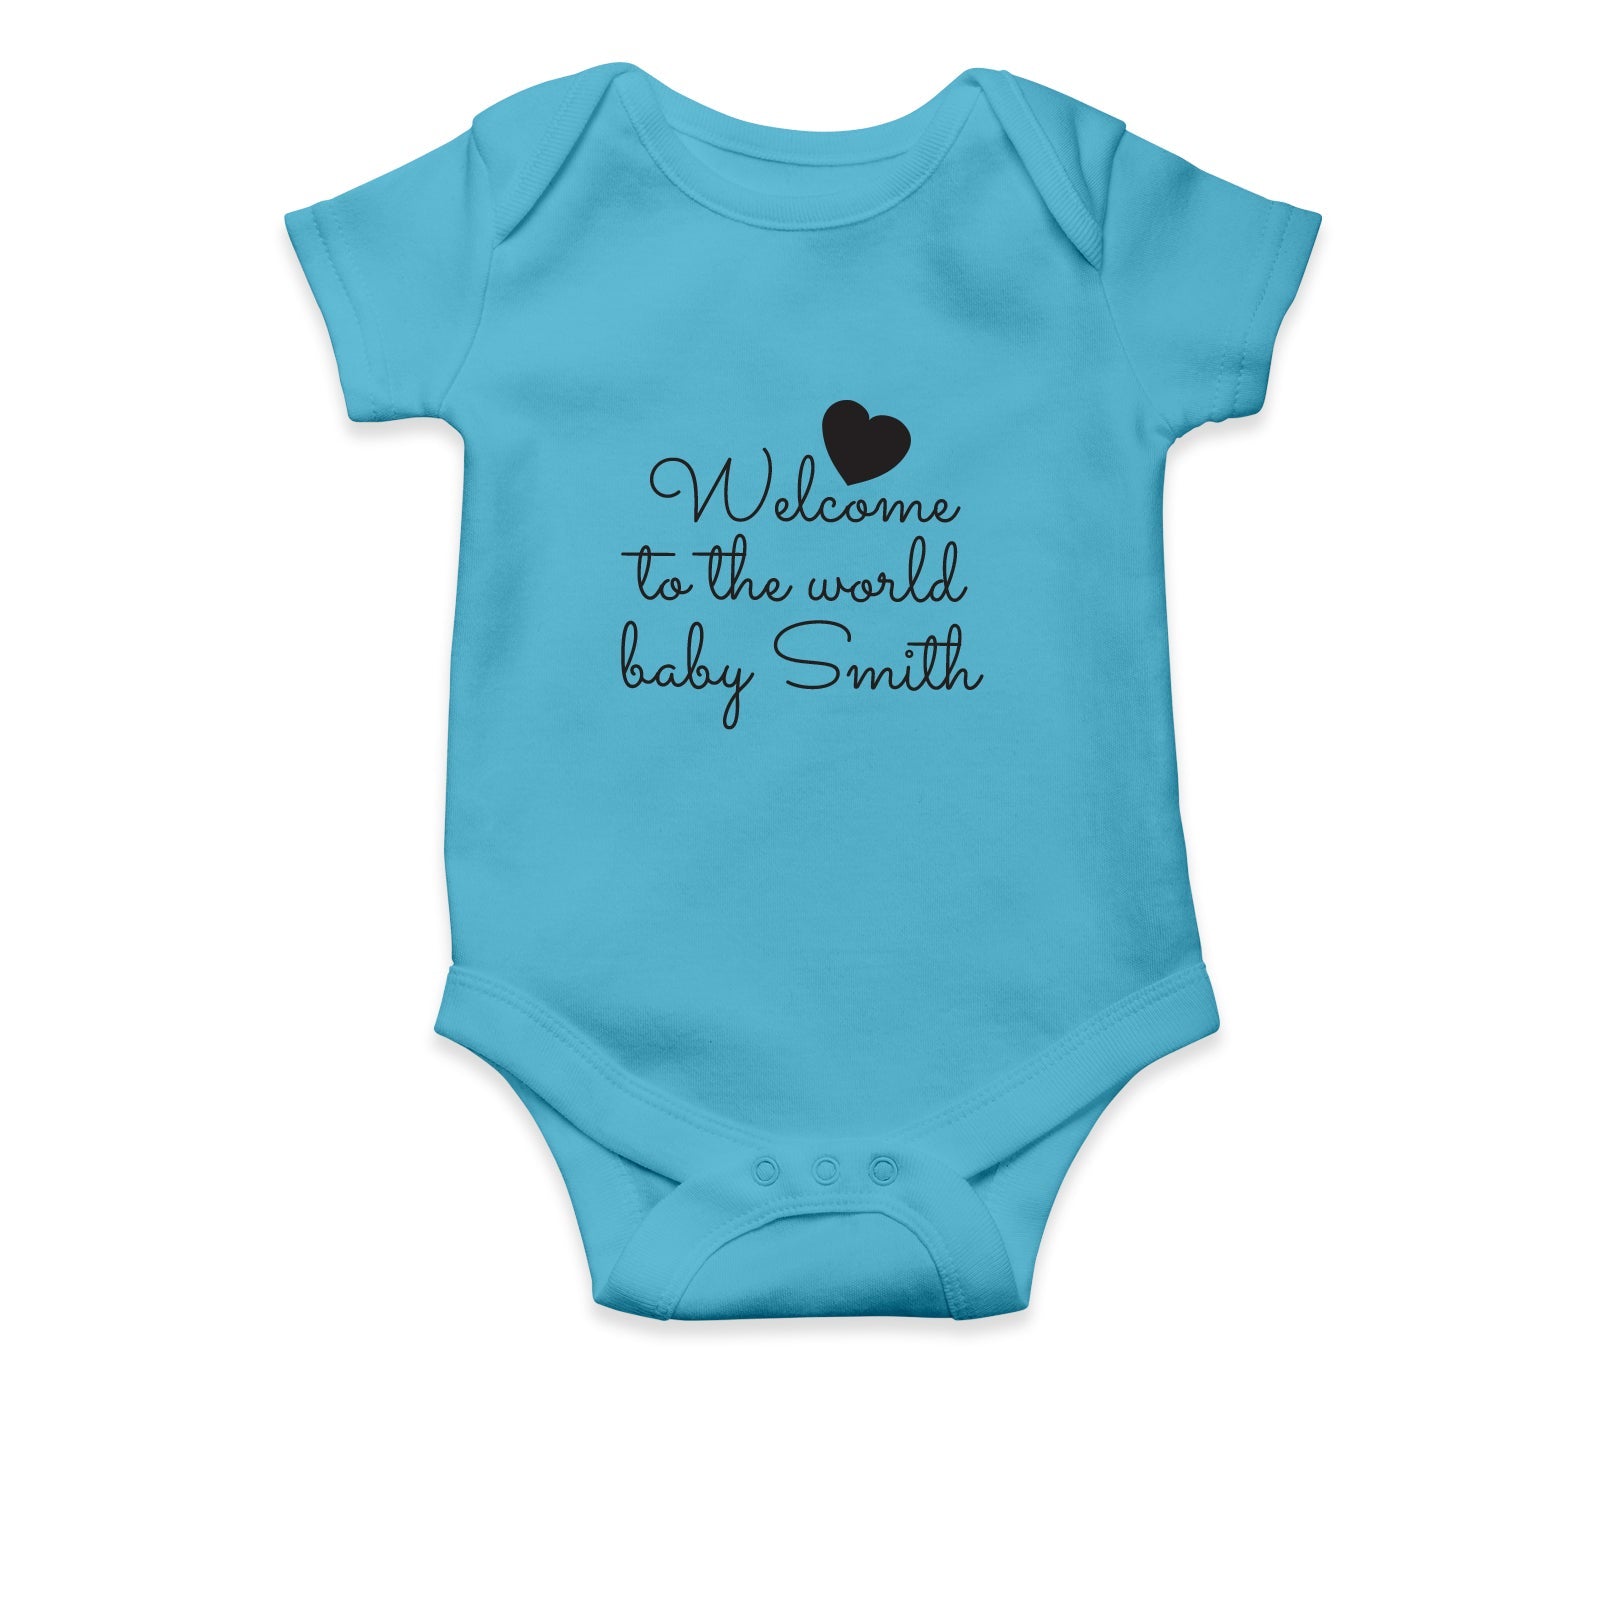 Personalised White Baby Body Suit Grow Vest - Small Cursive